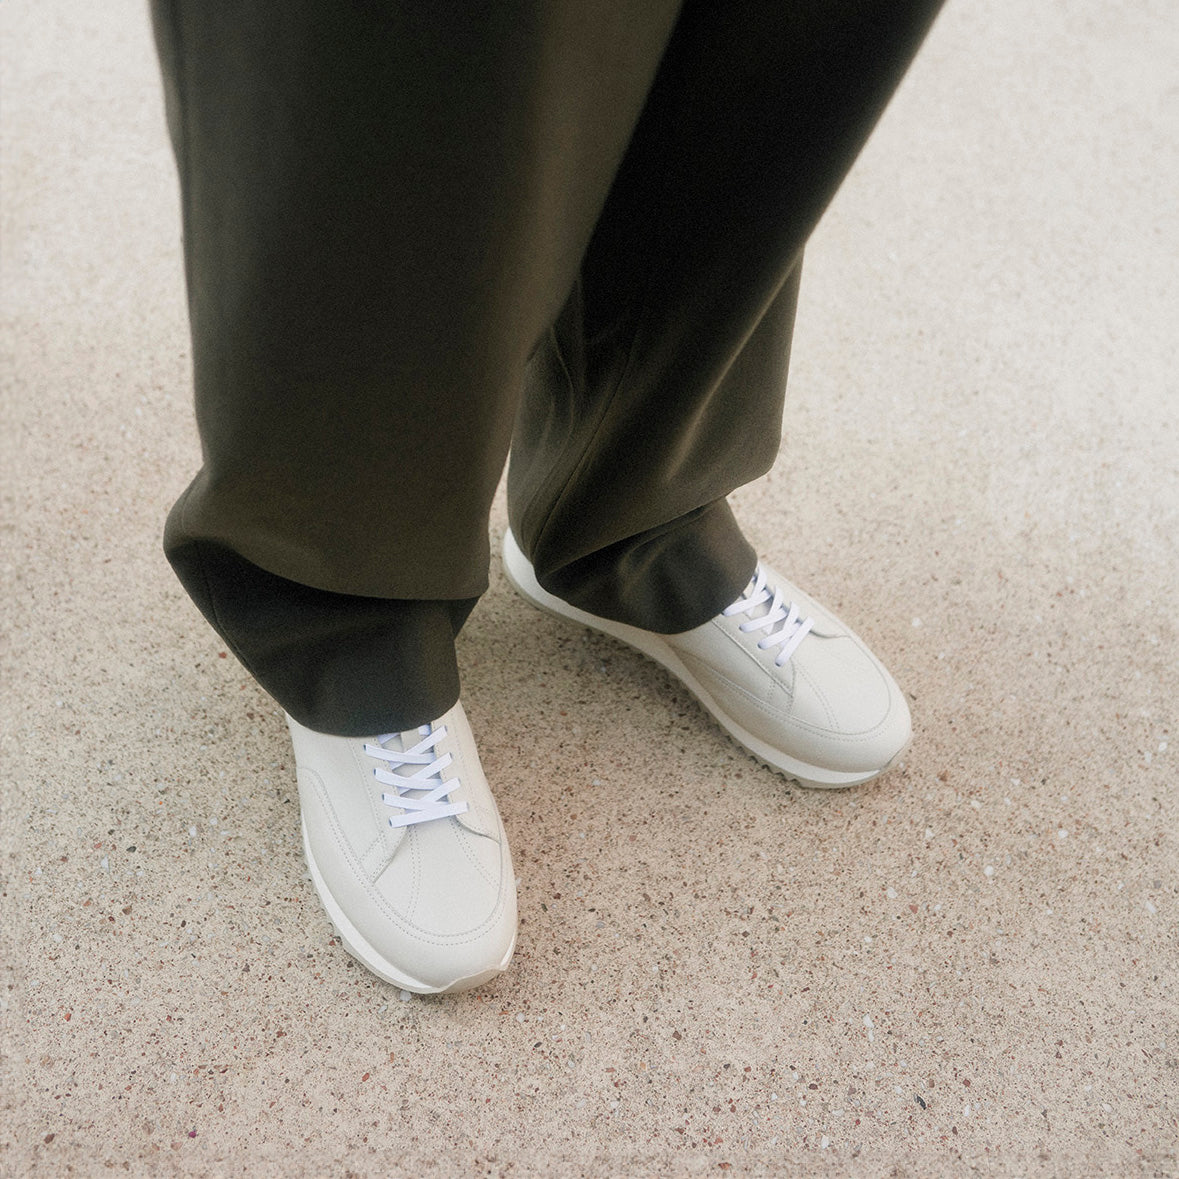 Timothee paris sneaker cabourg cotton white worn by a man